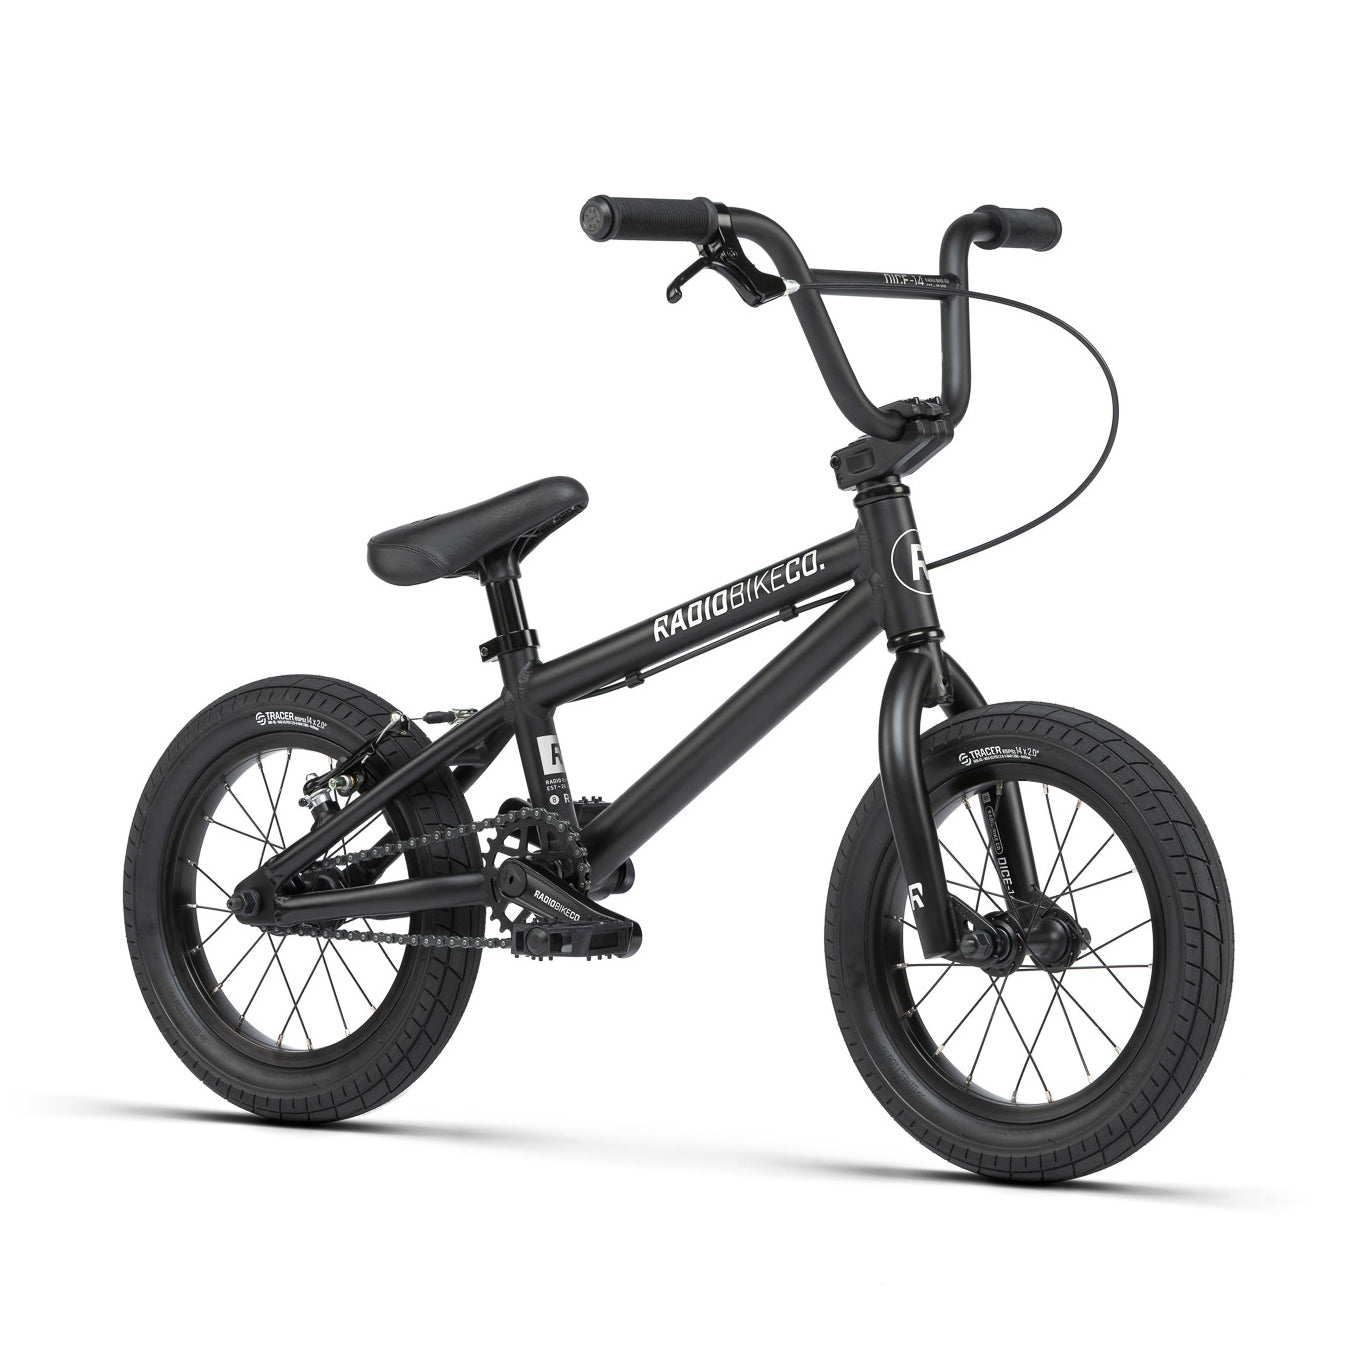 A black Radio Dice 14 Inch Bike with a lightweight 6061-T6 alloy frame, padded seat, and thick tires designed for off-road and stunt riding. The bike proudly displays "Radio Bikes Co." branding on the frame.